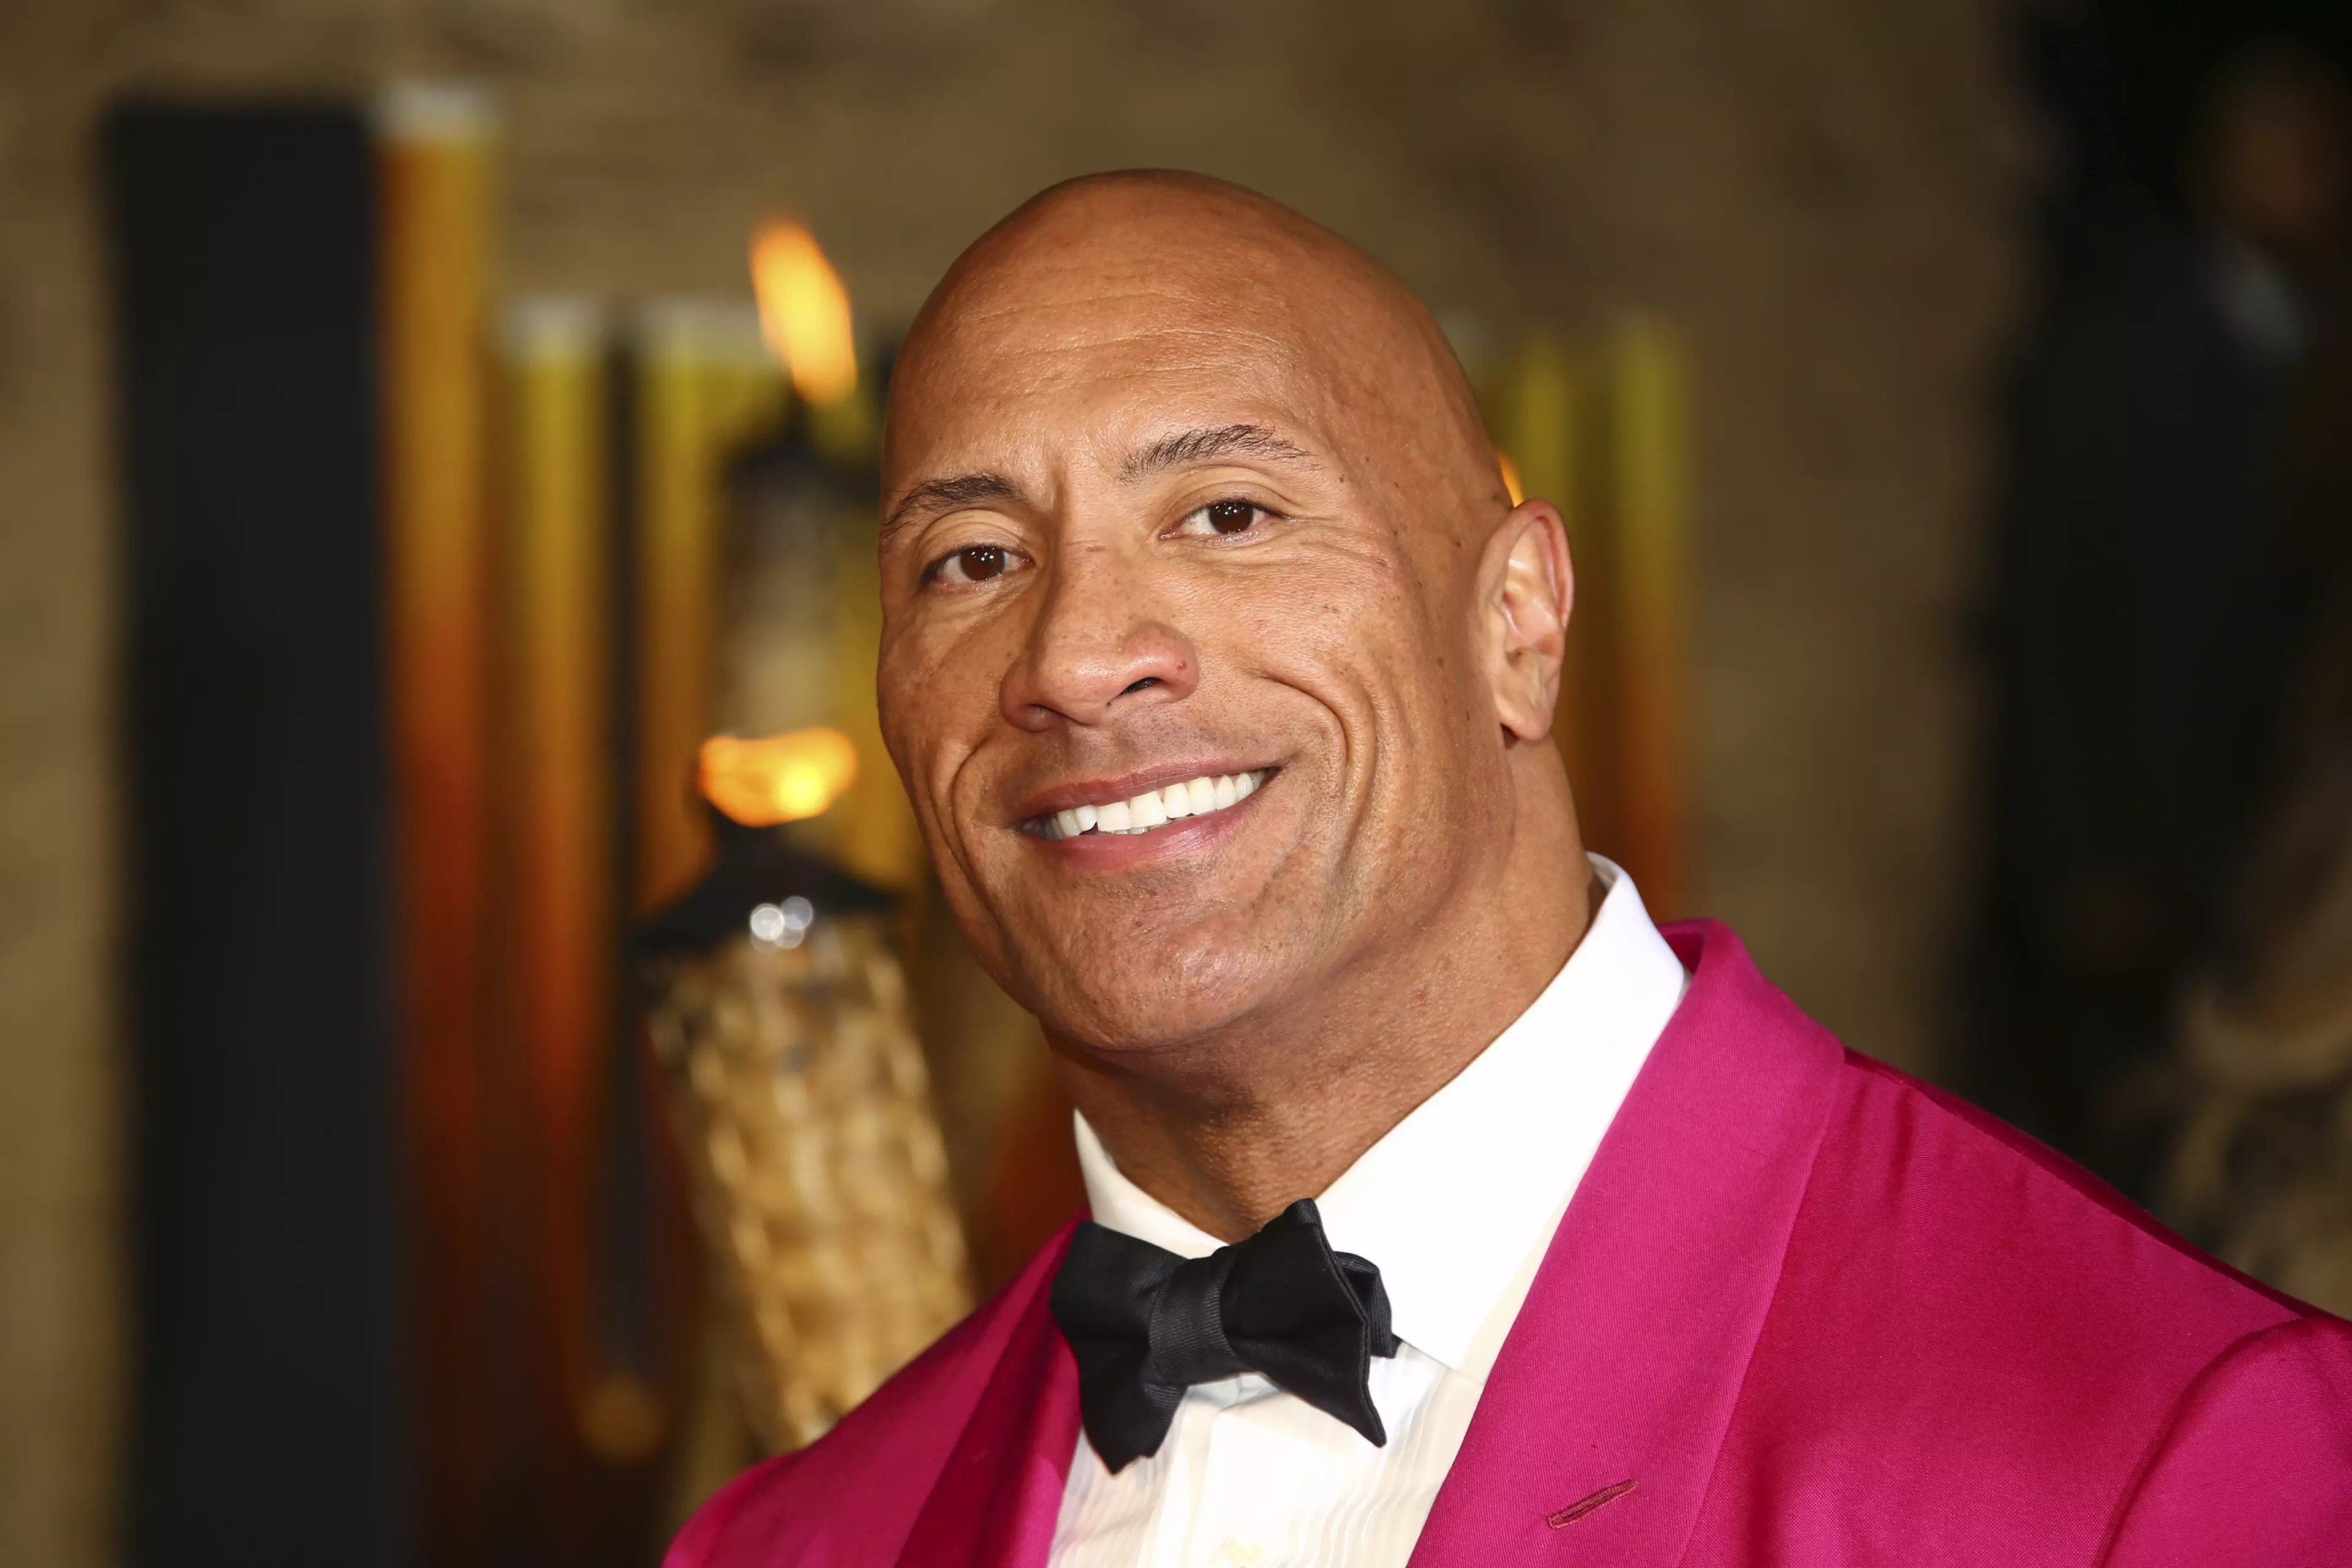 Dwayne Johnson will be working on a series called Last Resort.